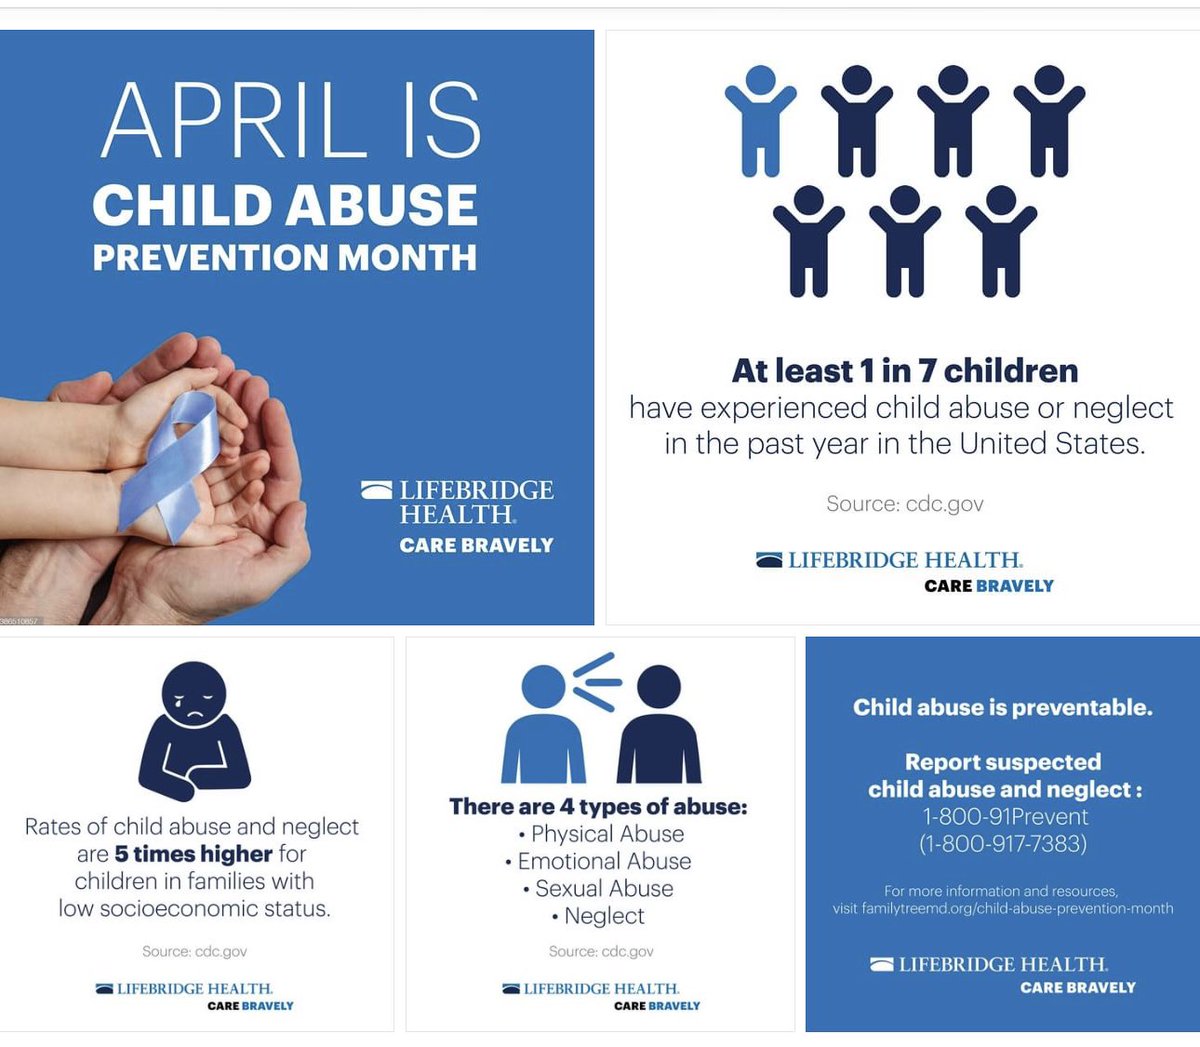 April is Child Abuse Prevention Month. 

It’s important for everyone to know that abuse is not just physical; abuse can also be emotional, sexual and neglect.

Learn more here: bit.ly/4cz9Zpz

#LifeBridgeHealth  #ChildAbusePreventionMonth